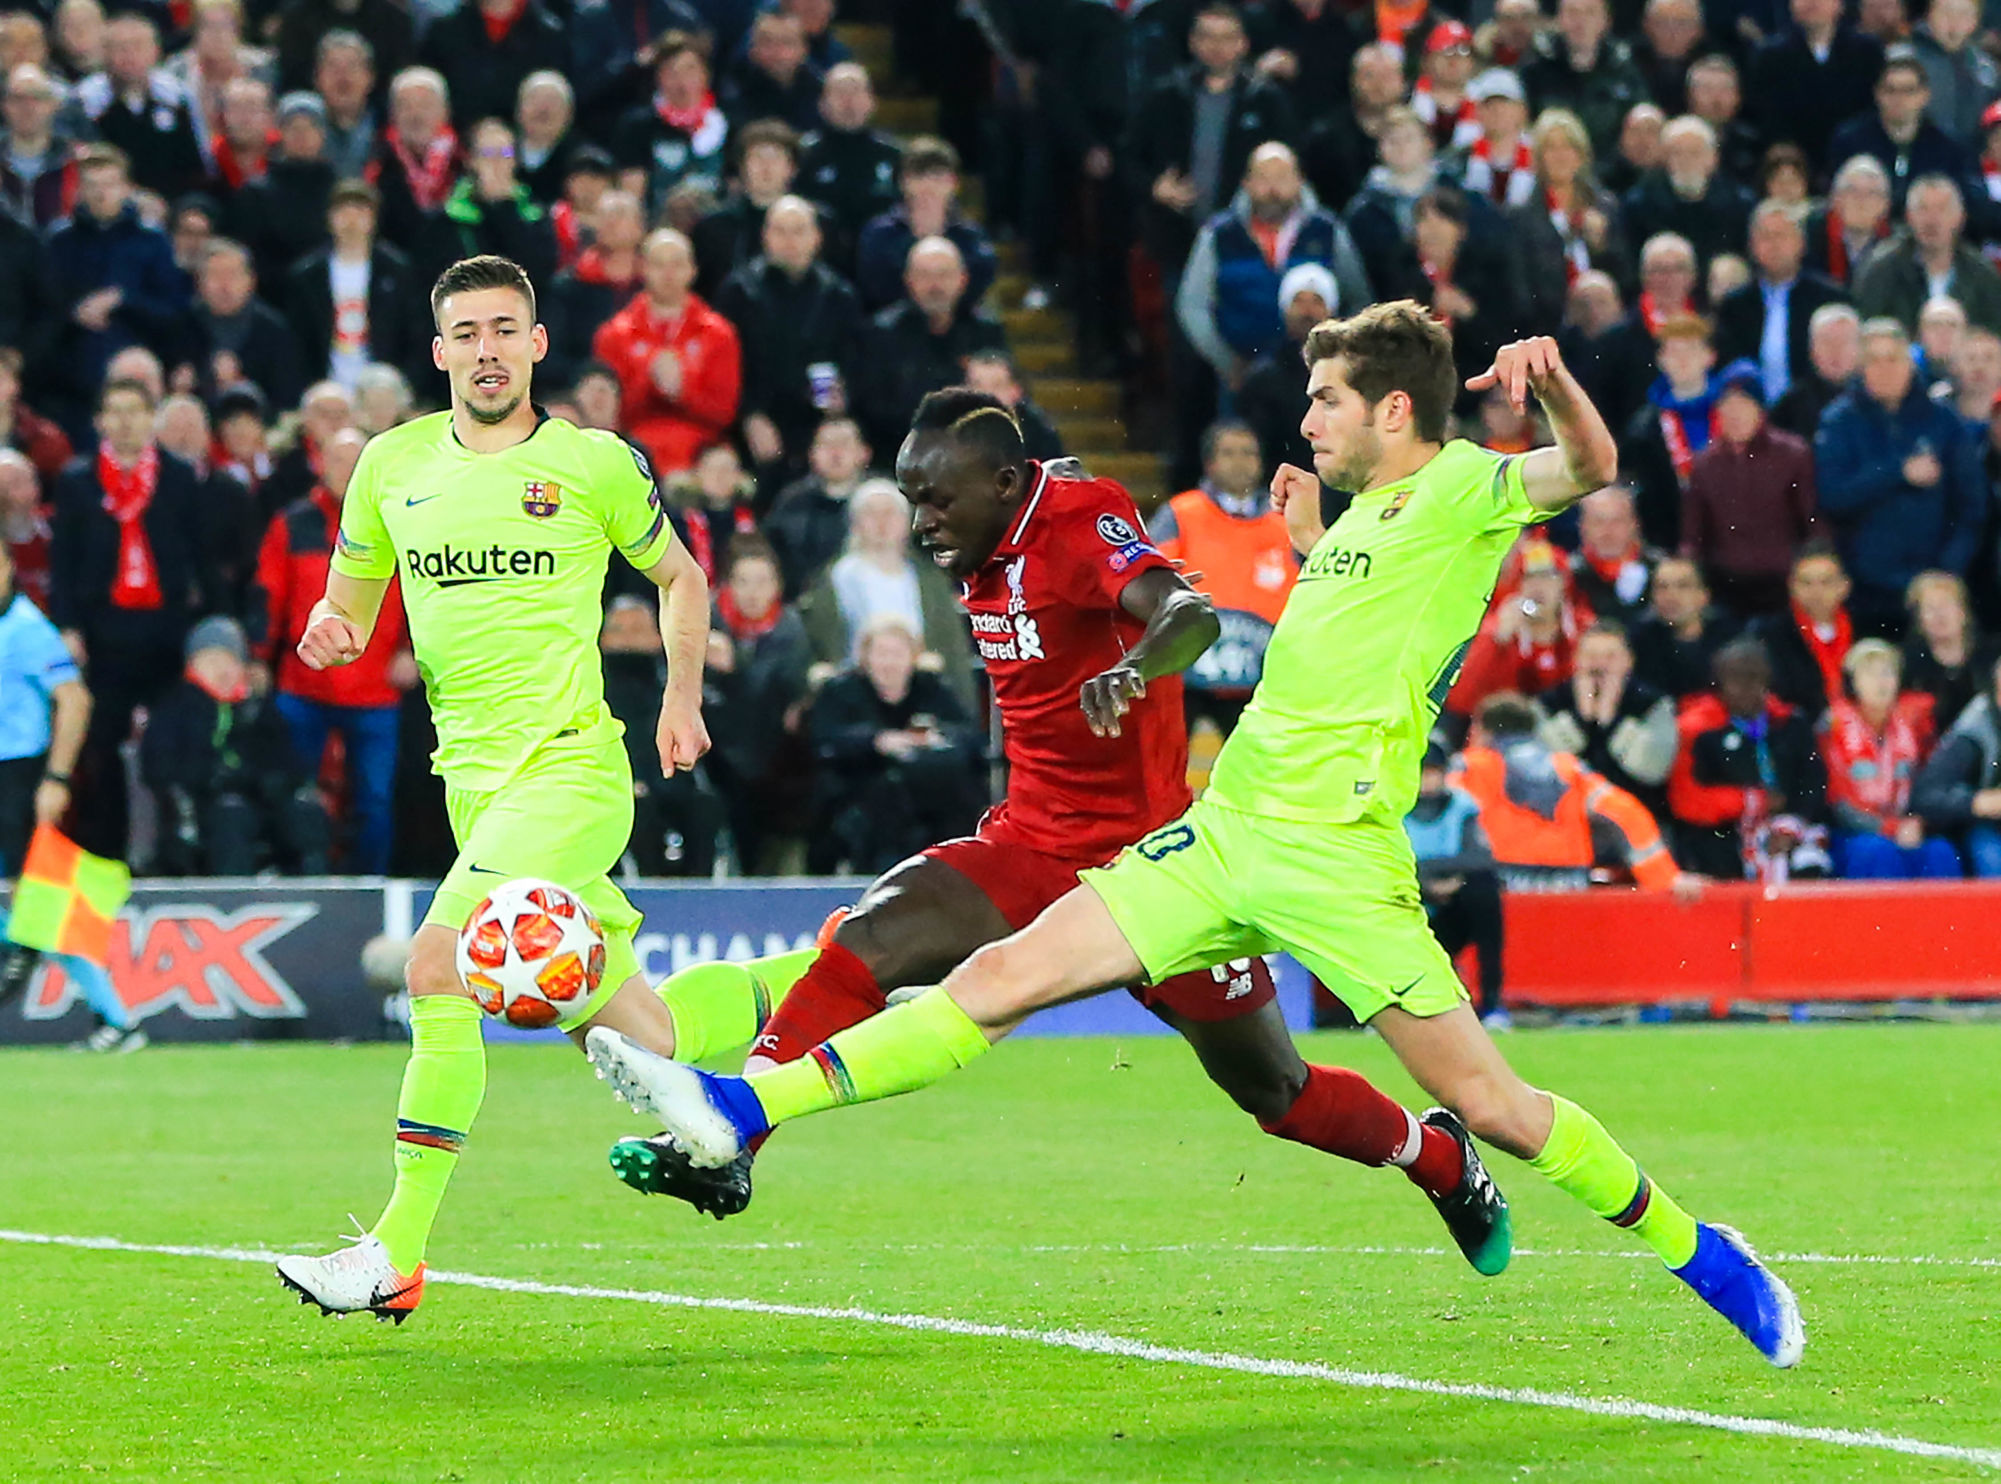 7th May 2019, Anfield, Liverpool, England; UEFA Champions League football, semi final second leg, Liverpool versus FC Barcelona; Sadio Mane of Liverpool and Sergi Roberto of Barcelona compete for the ball Photo : Actionplus / Icon Sport